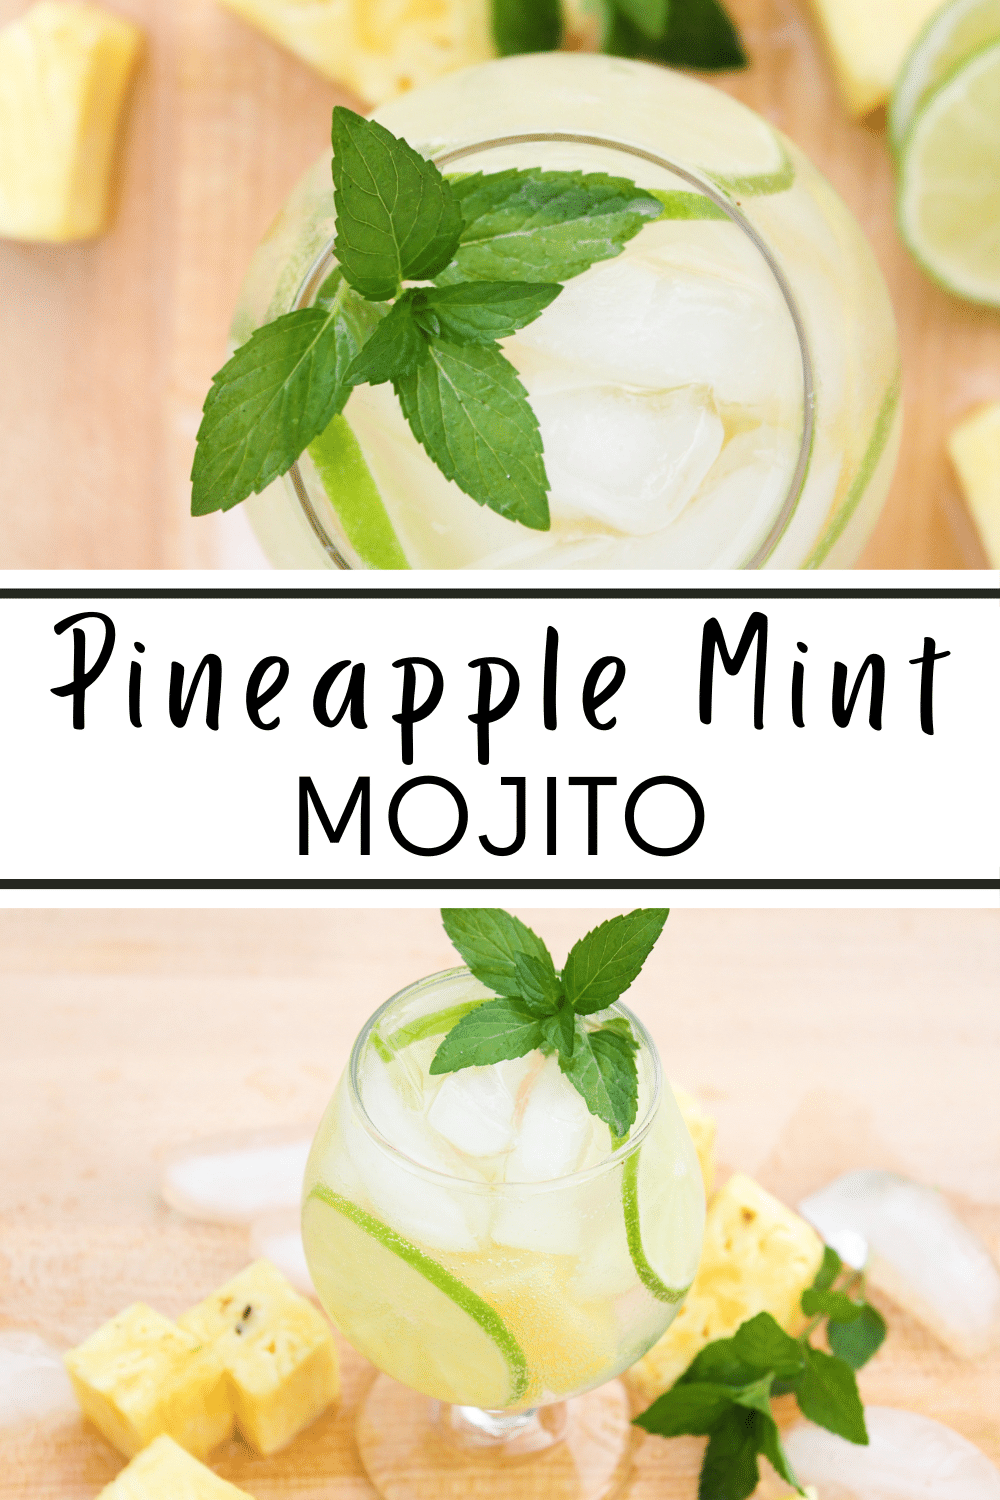 Pineapple Mint Mojito is a must-try beverage with a burst of tropical flavors filled with sweetness, tanginess, and a minty hint of rum. #pineapplemintmojito #pineapplemojitorecipe #pineapple #mojito #summerbeverage via @wondermomwannab